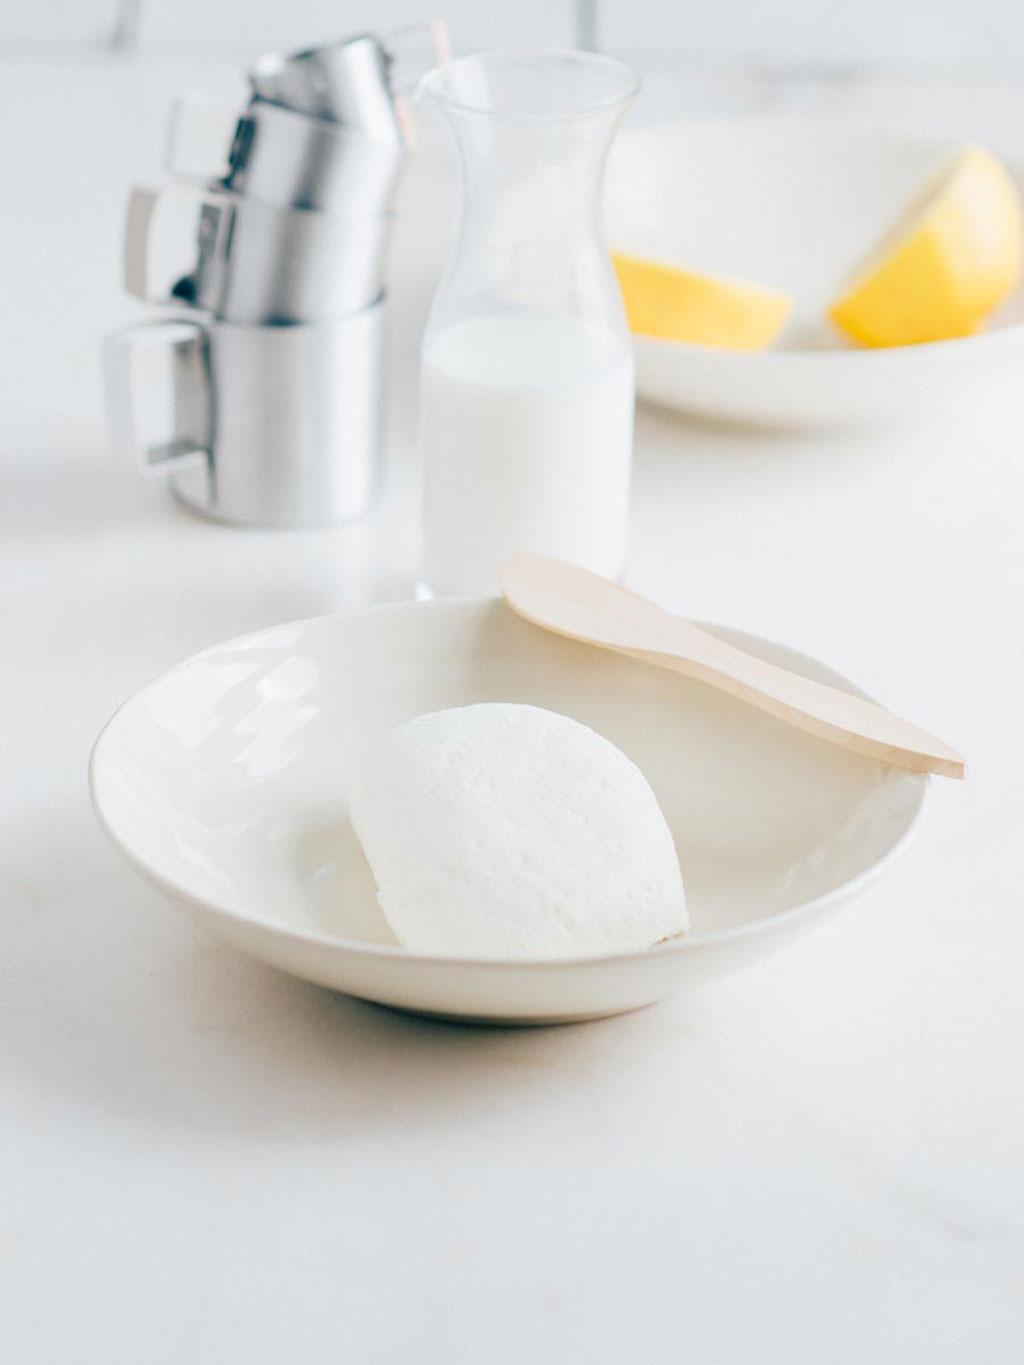 How to make ricotta at home